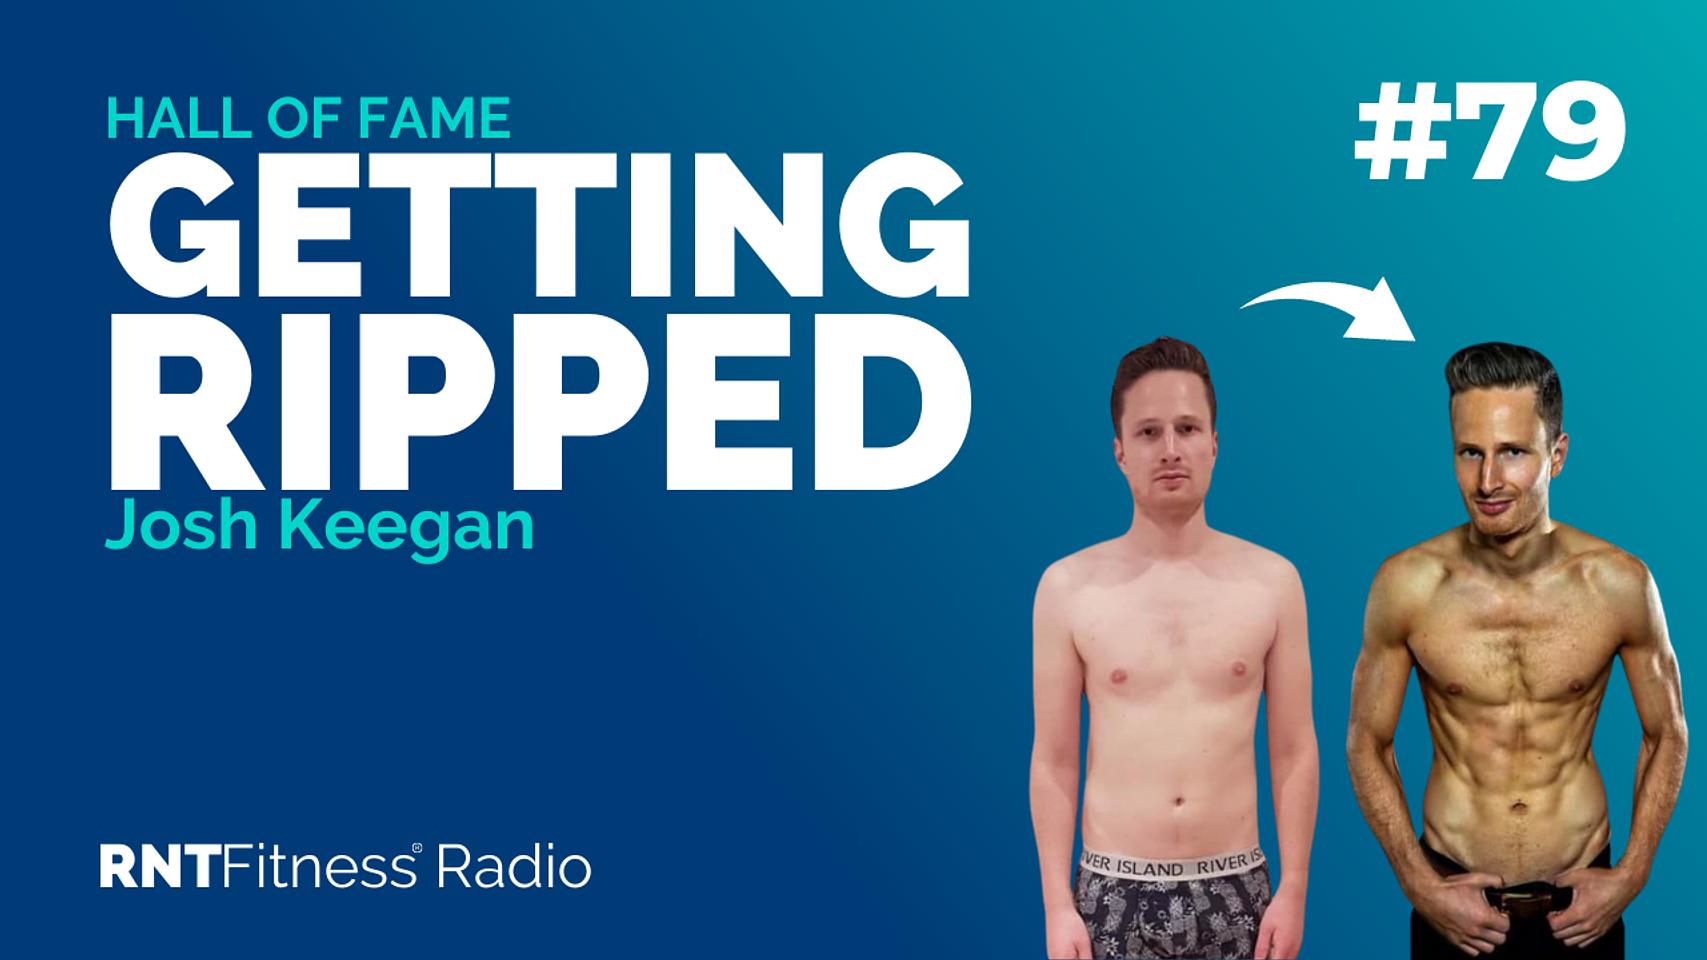 Ep. 79 - Hall of Fame | Josh Keegan – Getting Ripped & Using The Physical As A Vehicle For High Performance